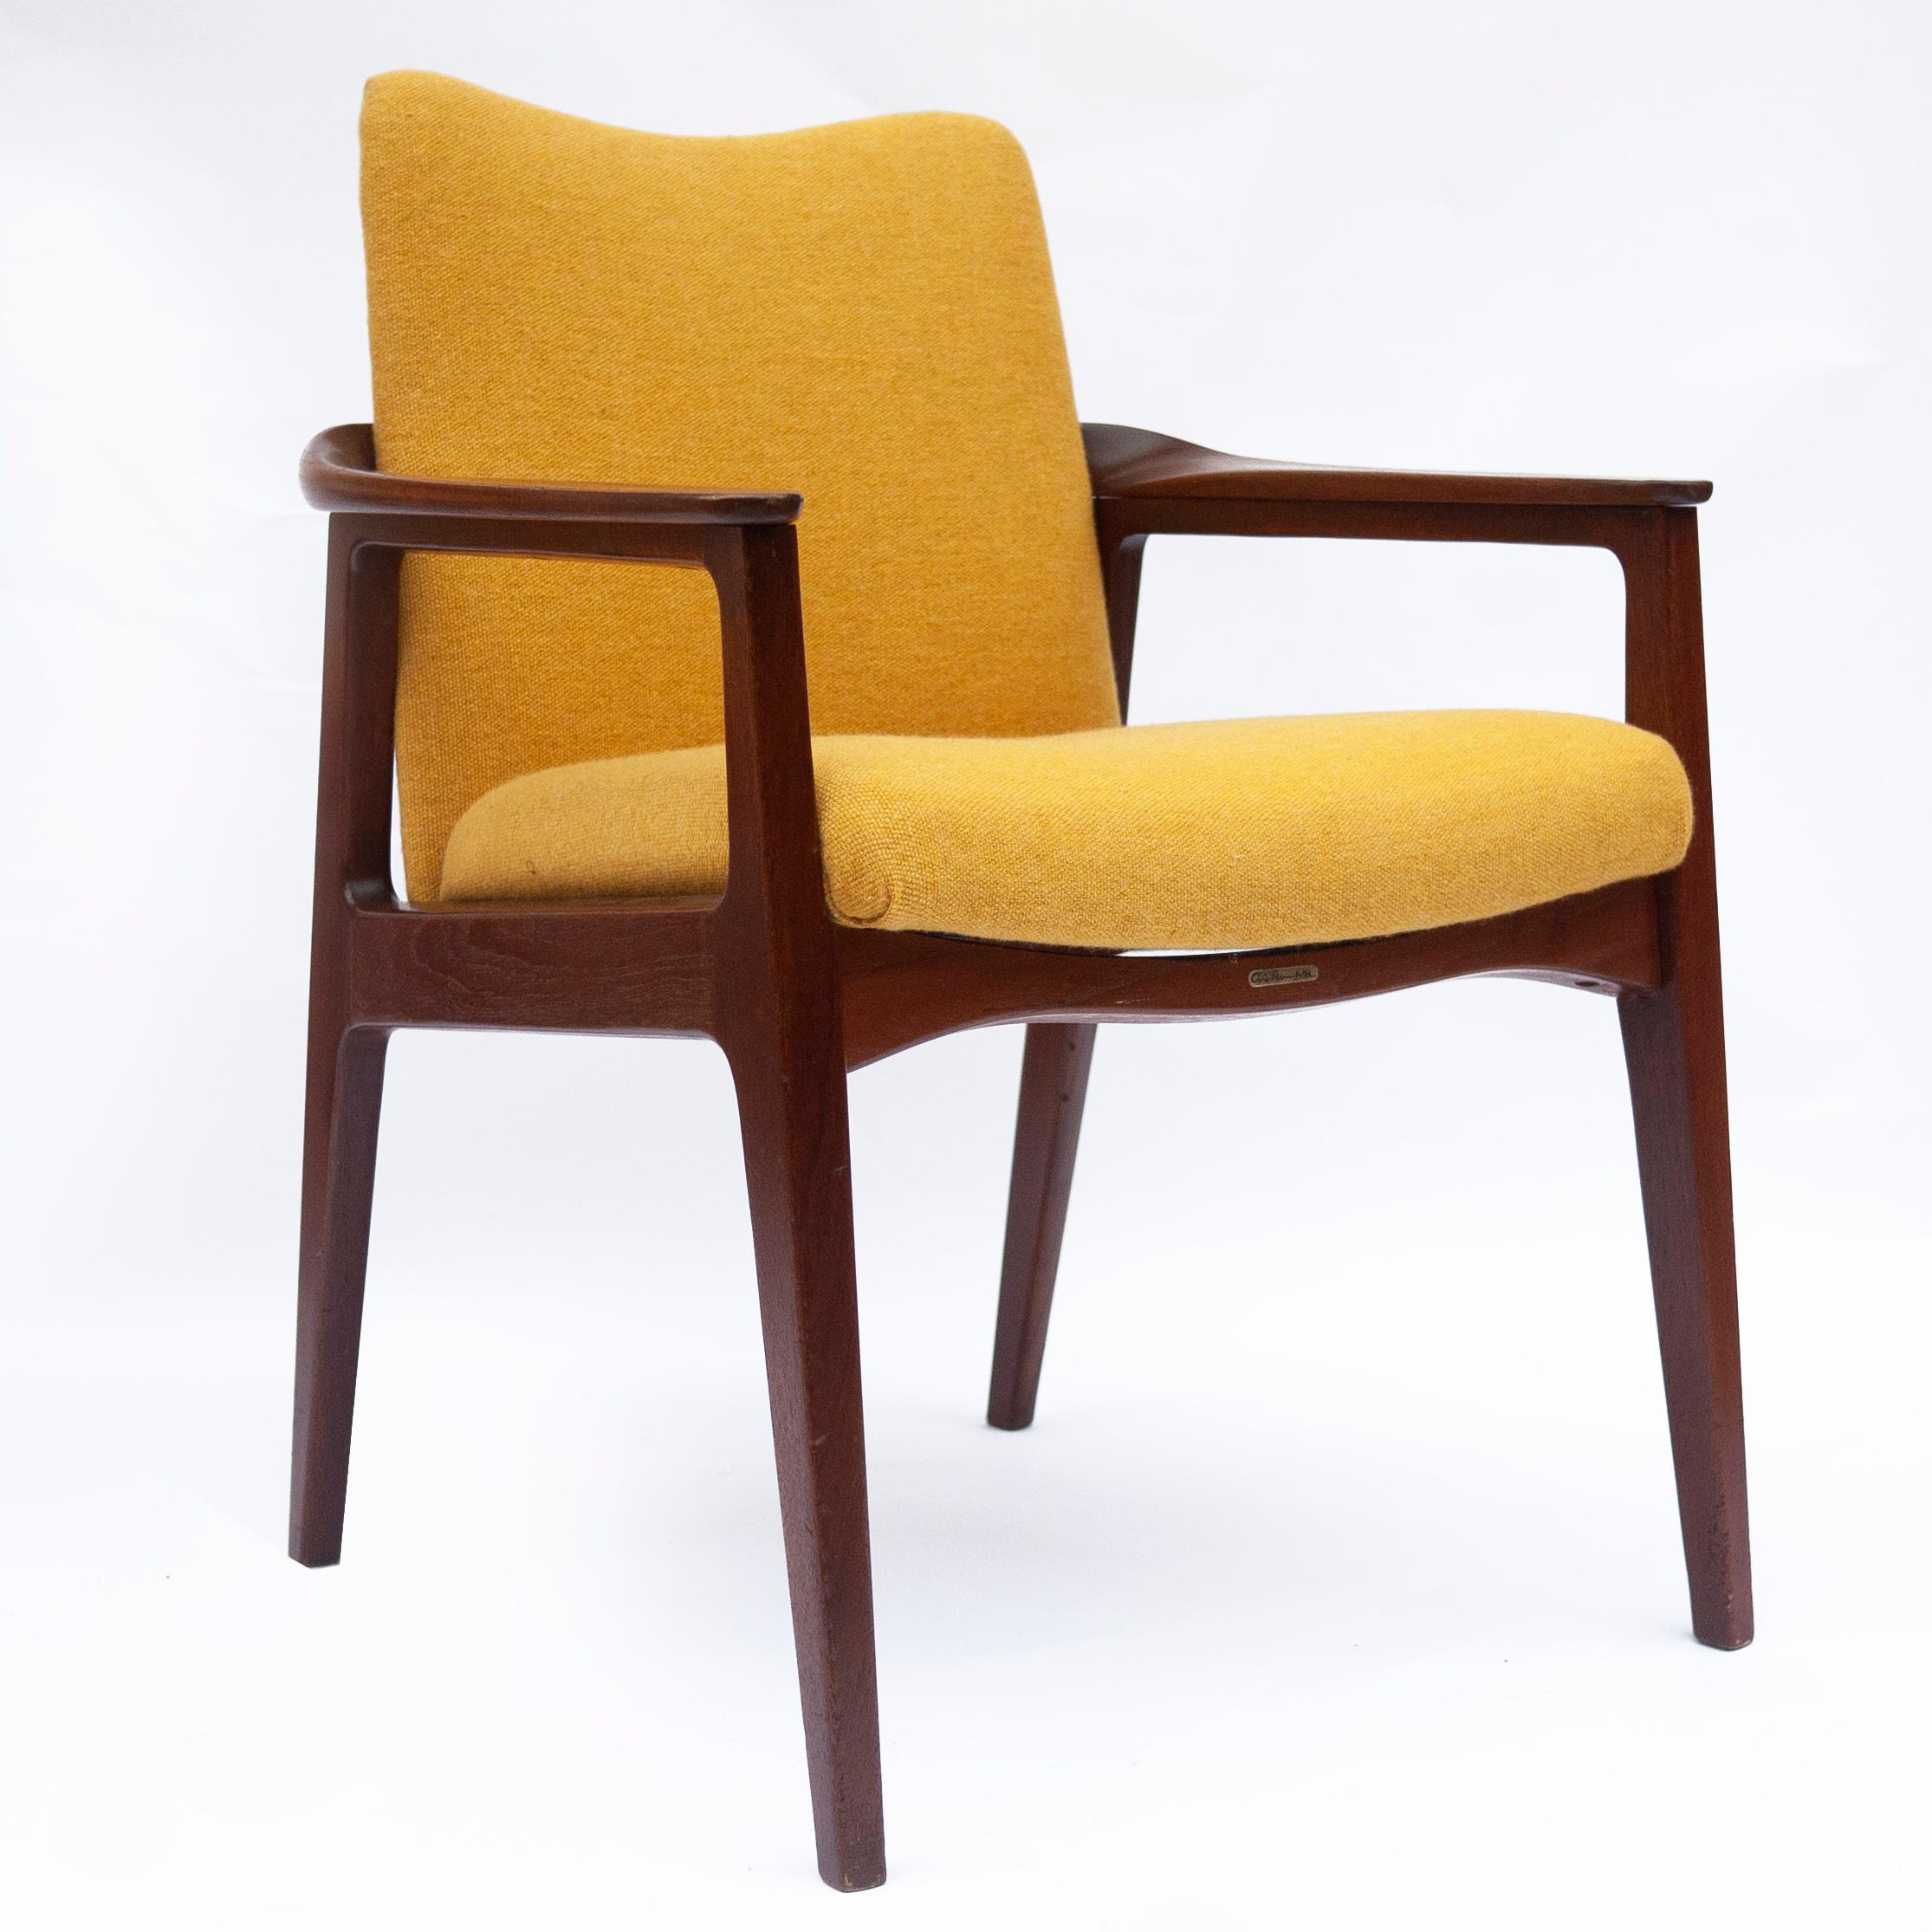 Mid-Century Teak Armchair with Yellow Upholstery by Sigvard Bernadotte 2